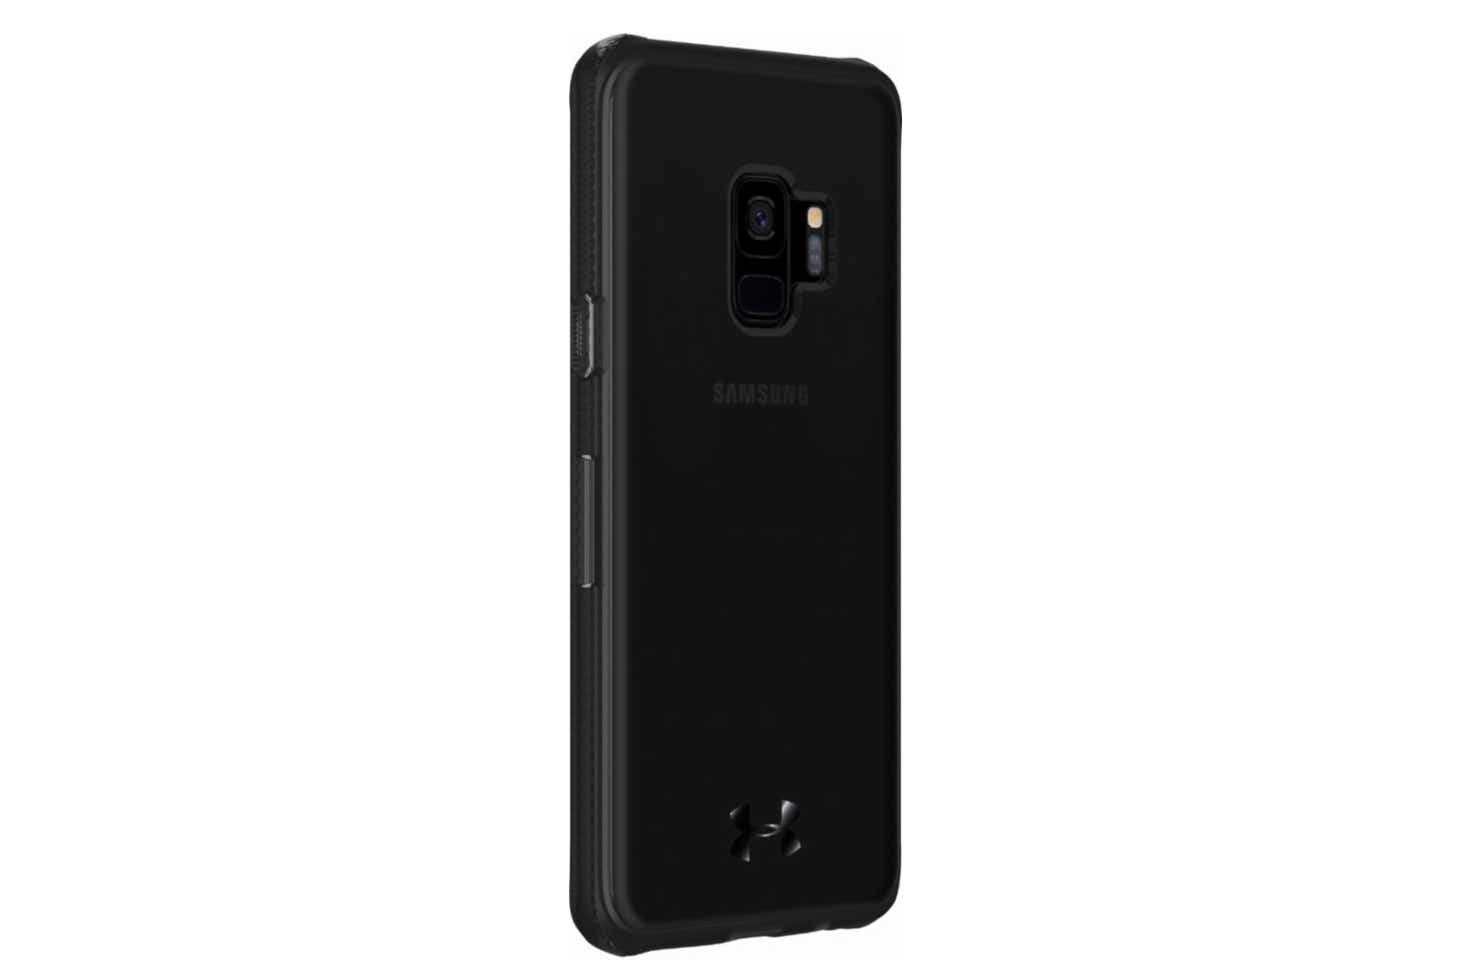 Best Samsung Galaxy S9 and S9+ cases: Top picks in every style | PCWorld